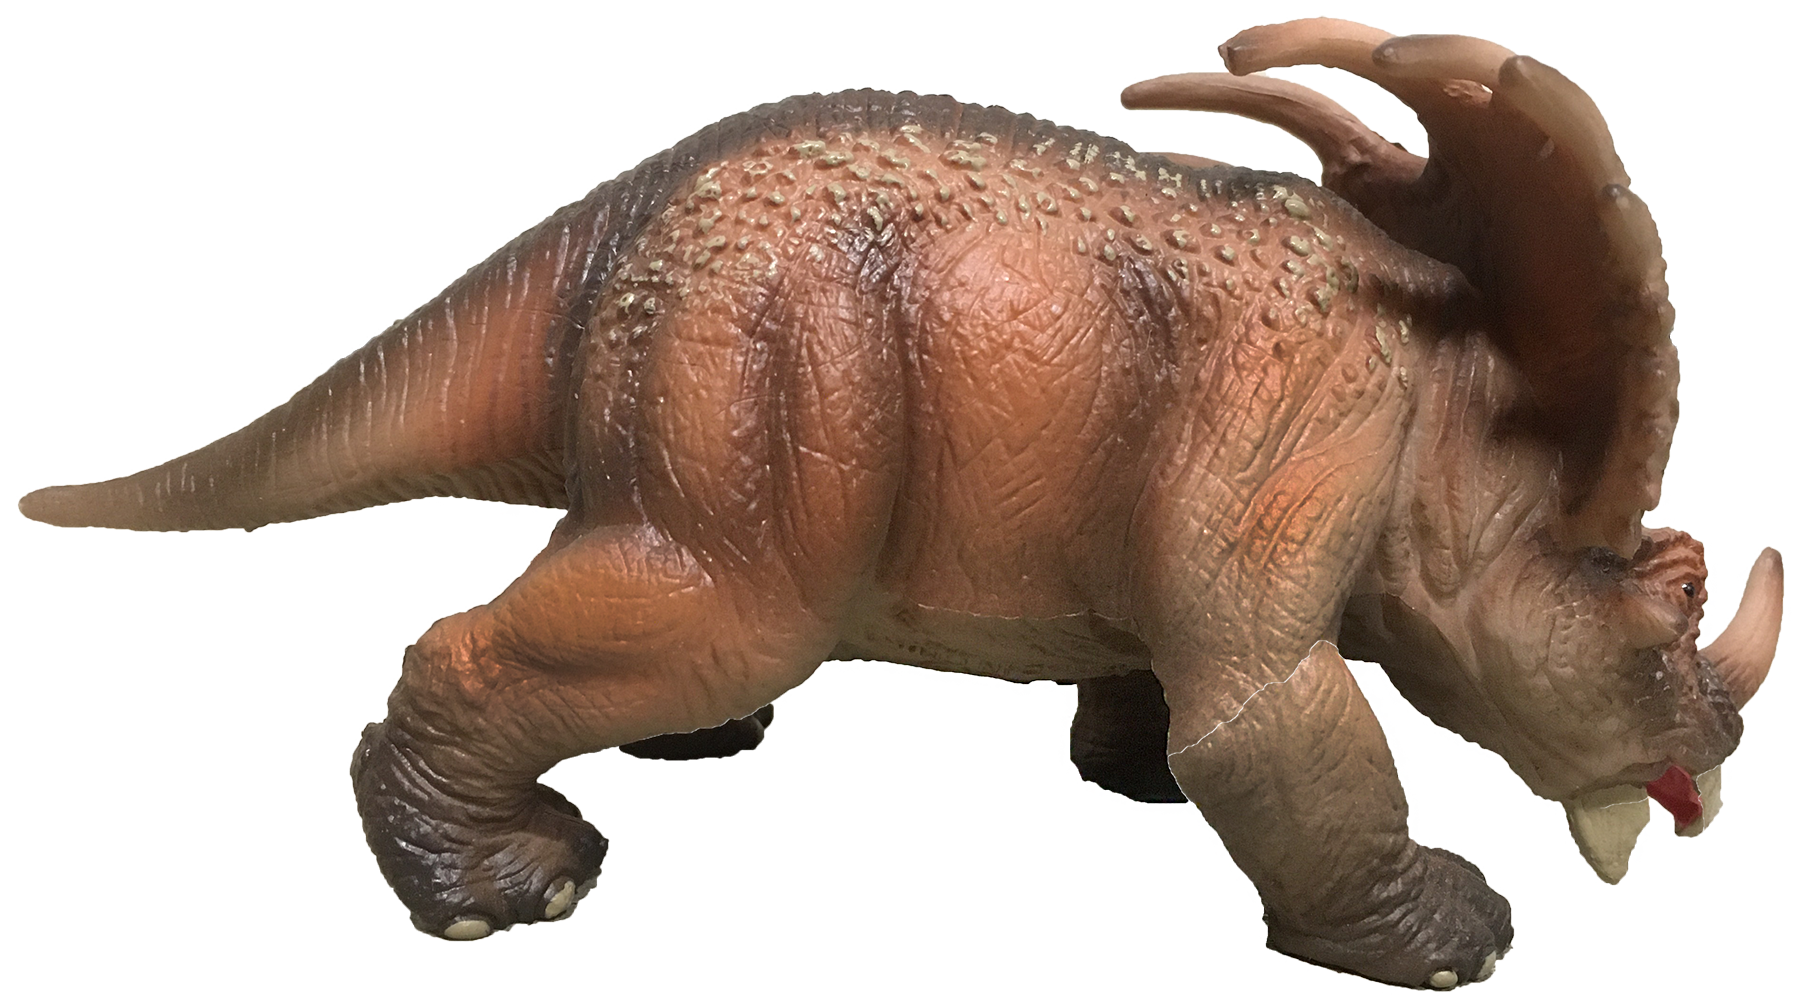 Geoworld Dinoart Painting Kit - Styracosaurus - Dinoart Painting Kit -  Styracosaurus . Buy Styracosaurus toys in India. shop for Geoworld products  in India. Toys for 3 - 15 Years Kids.